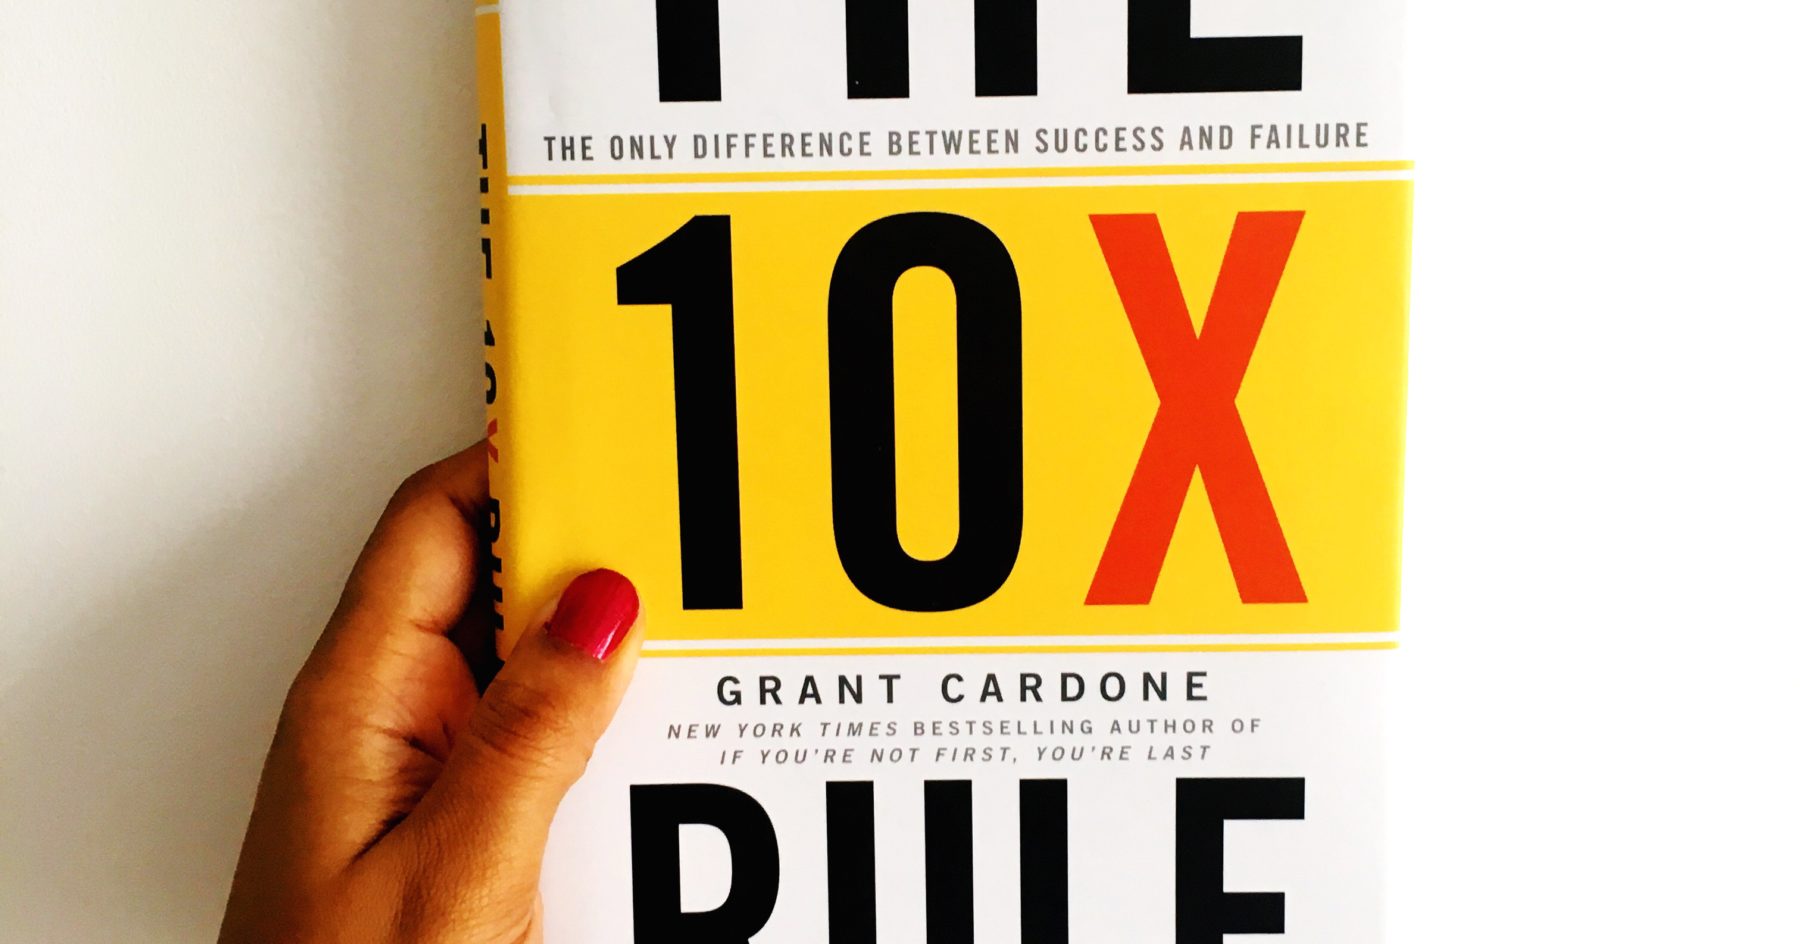 The 10x Rule by Grant Cardone. 10x Rule book. Grant Cardone: sell or be sold. Only difference